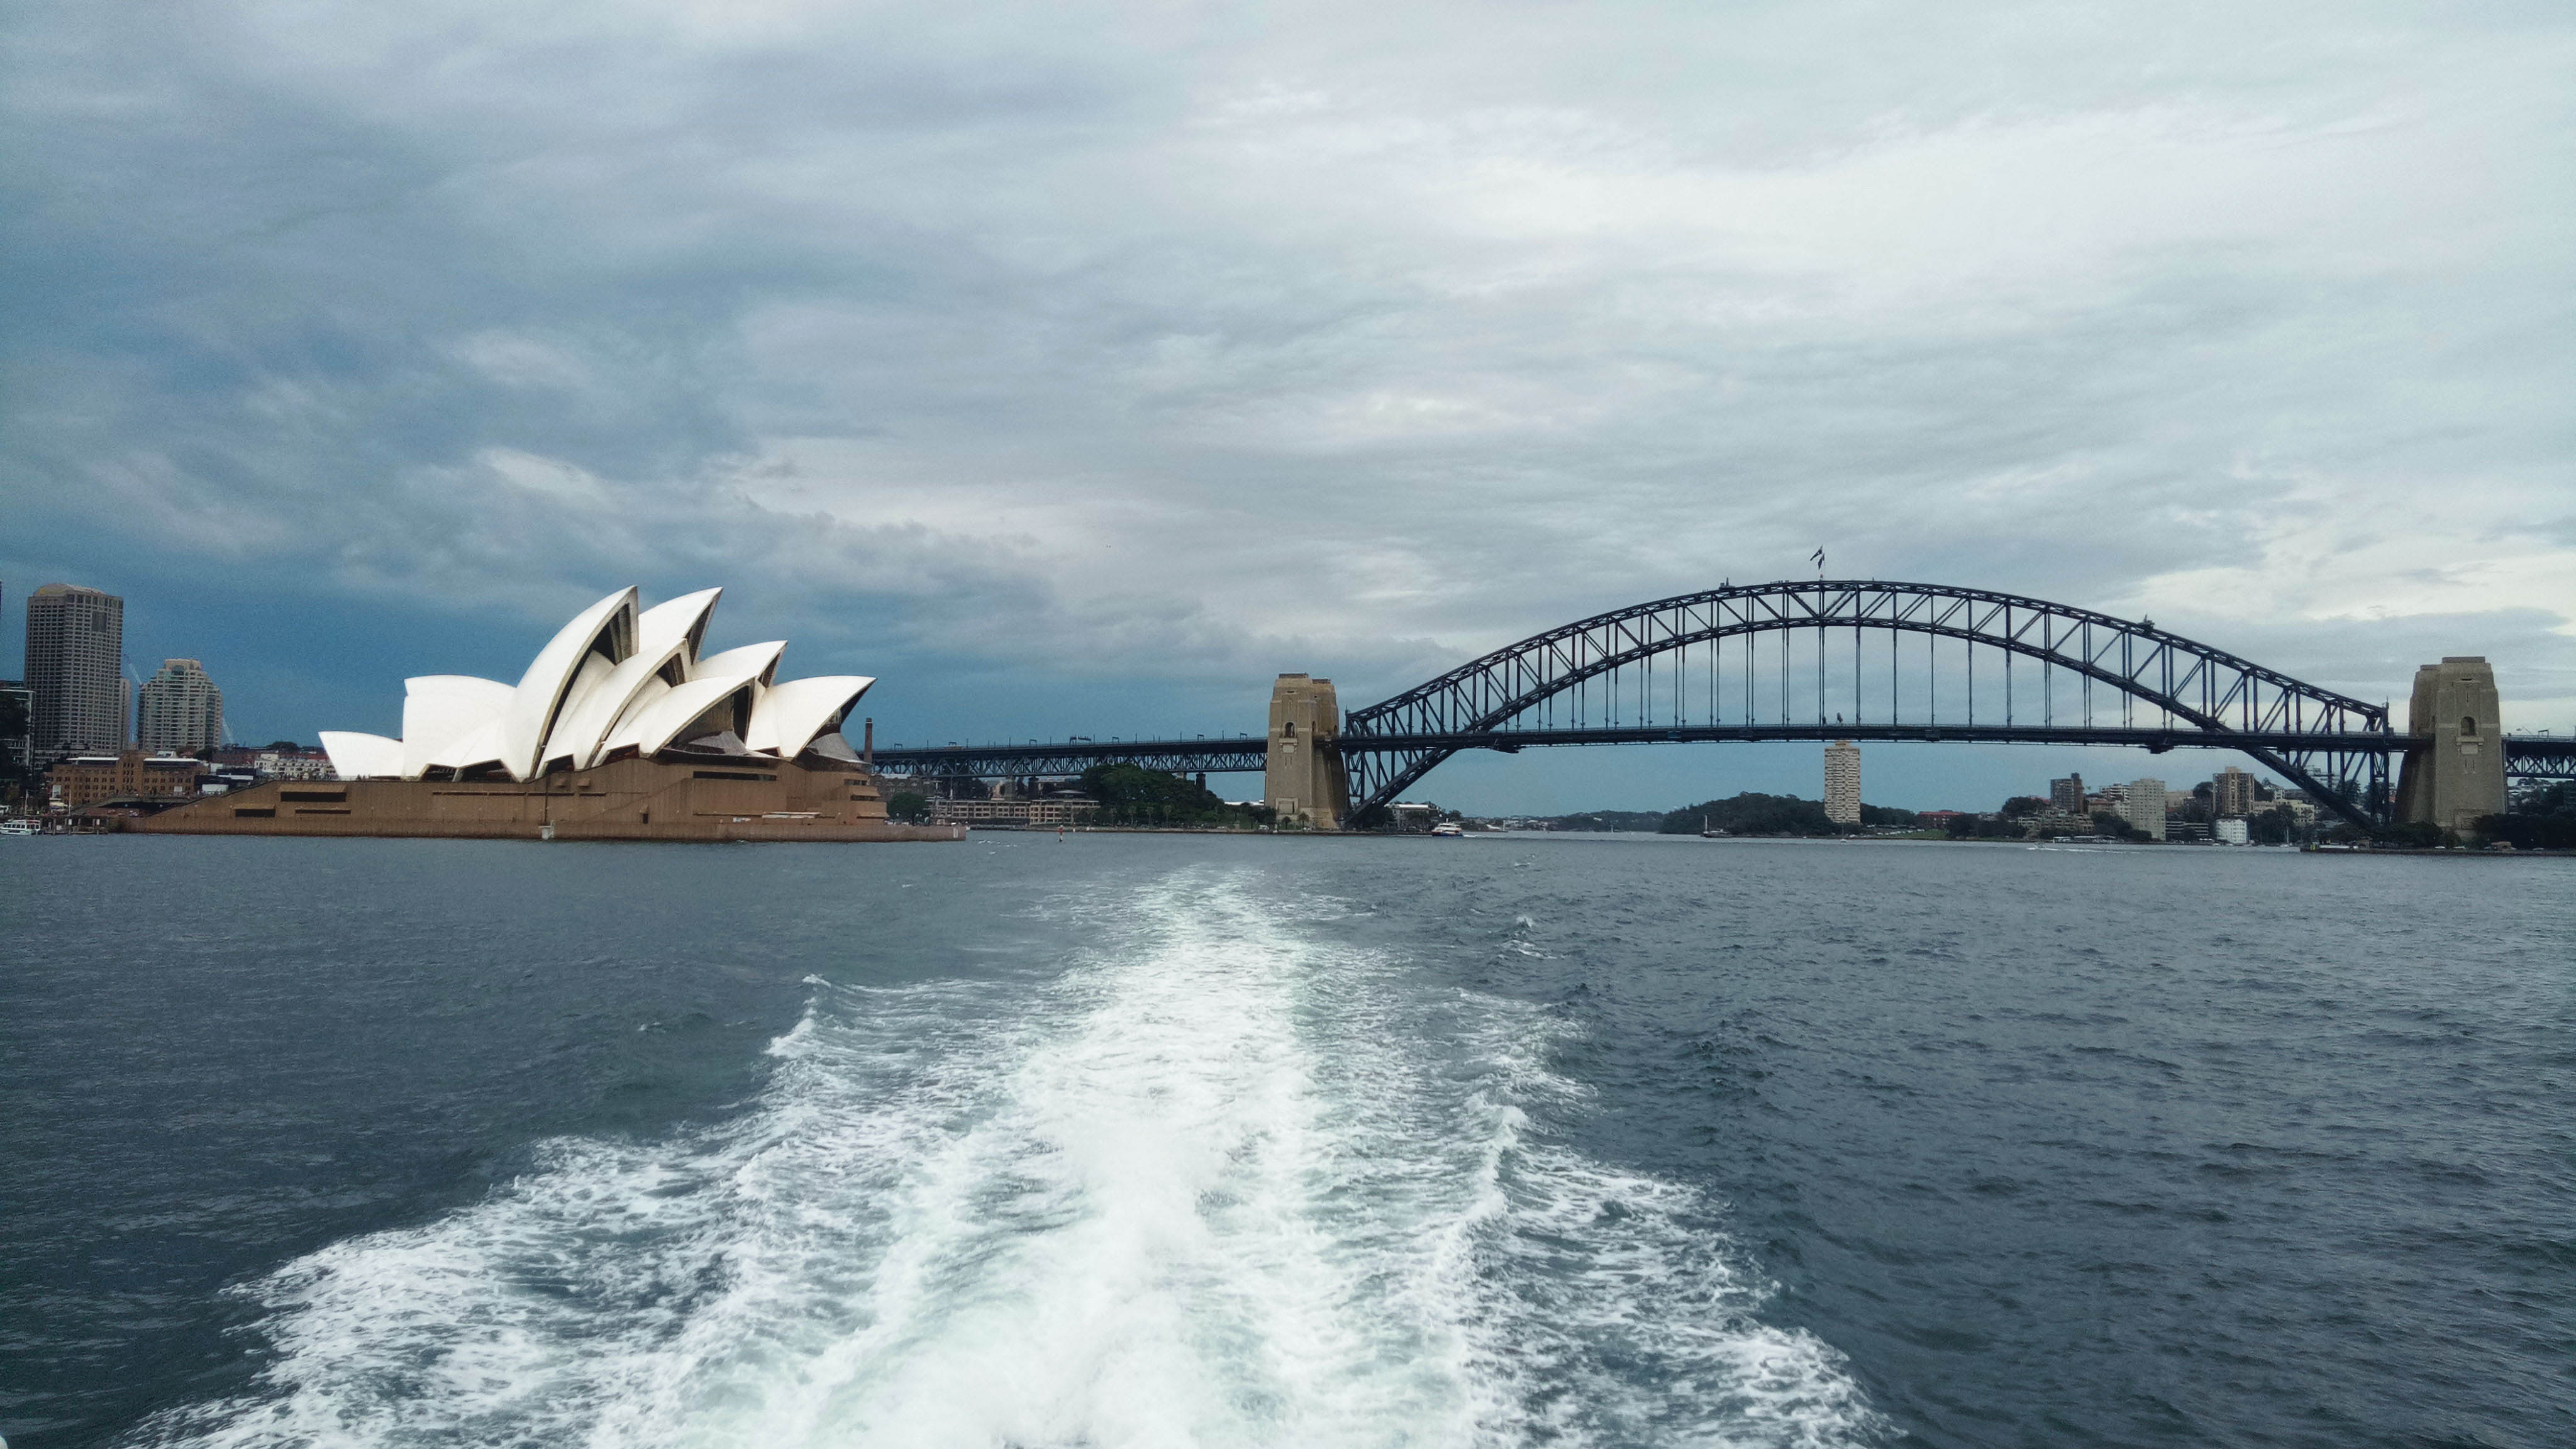 Image of the Sydney Harbour